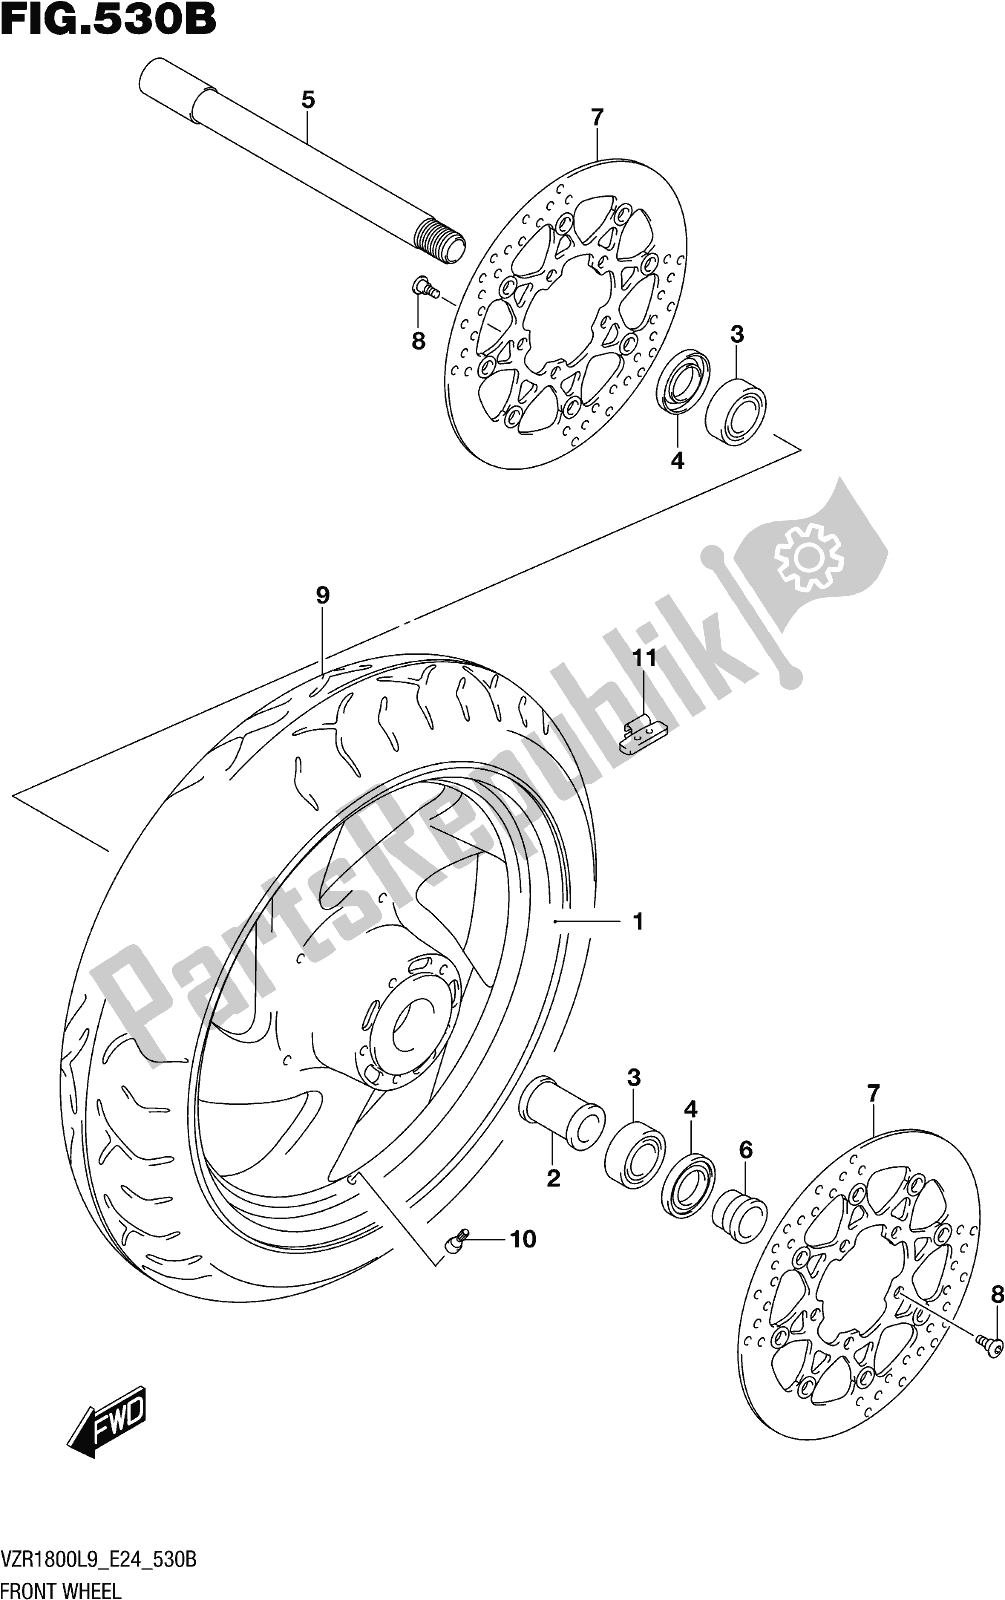 All parts for the Fig. 530b Front Wheel (vzr1800bzl9 E24) of the Suzuki VZR 1800 BZ 2019